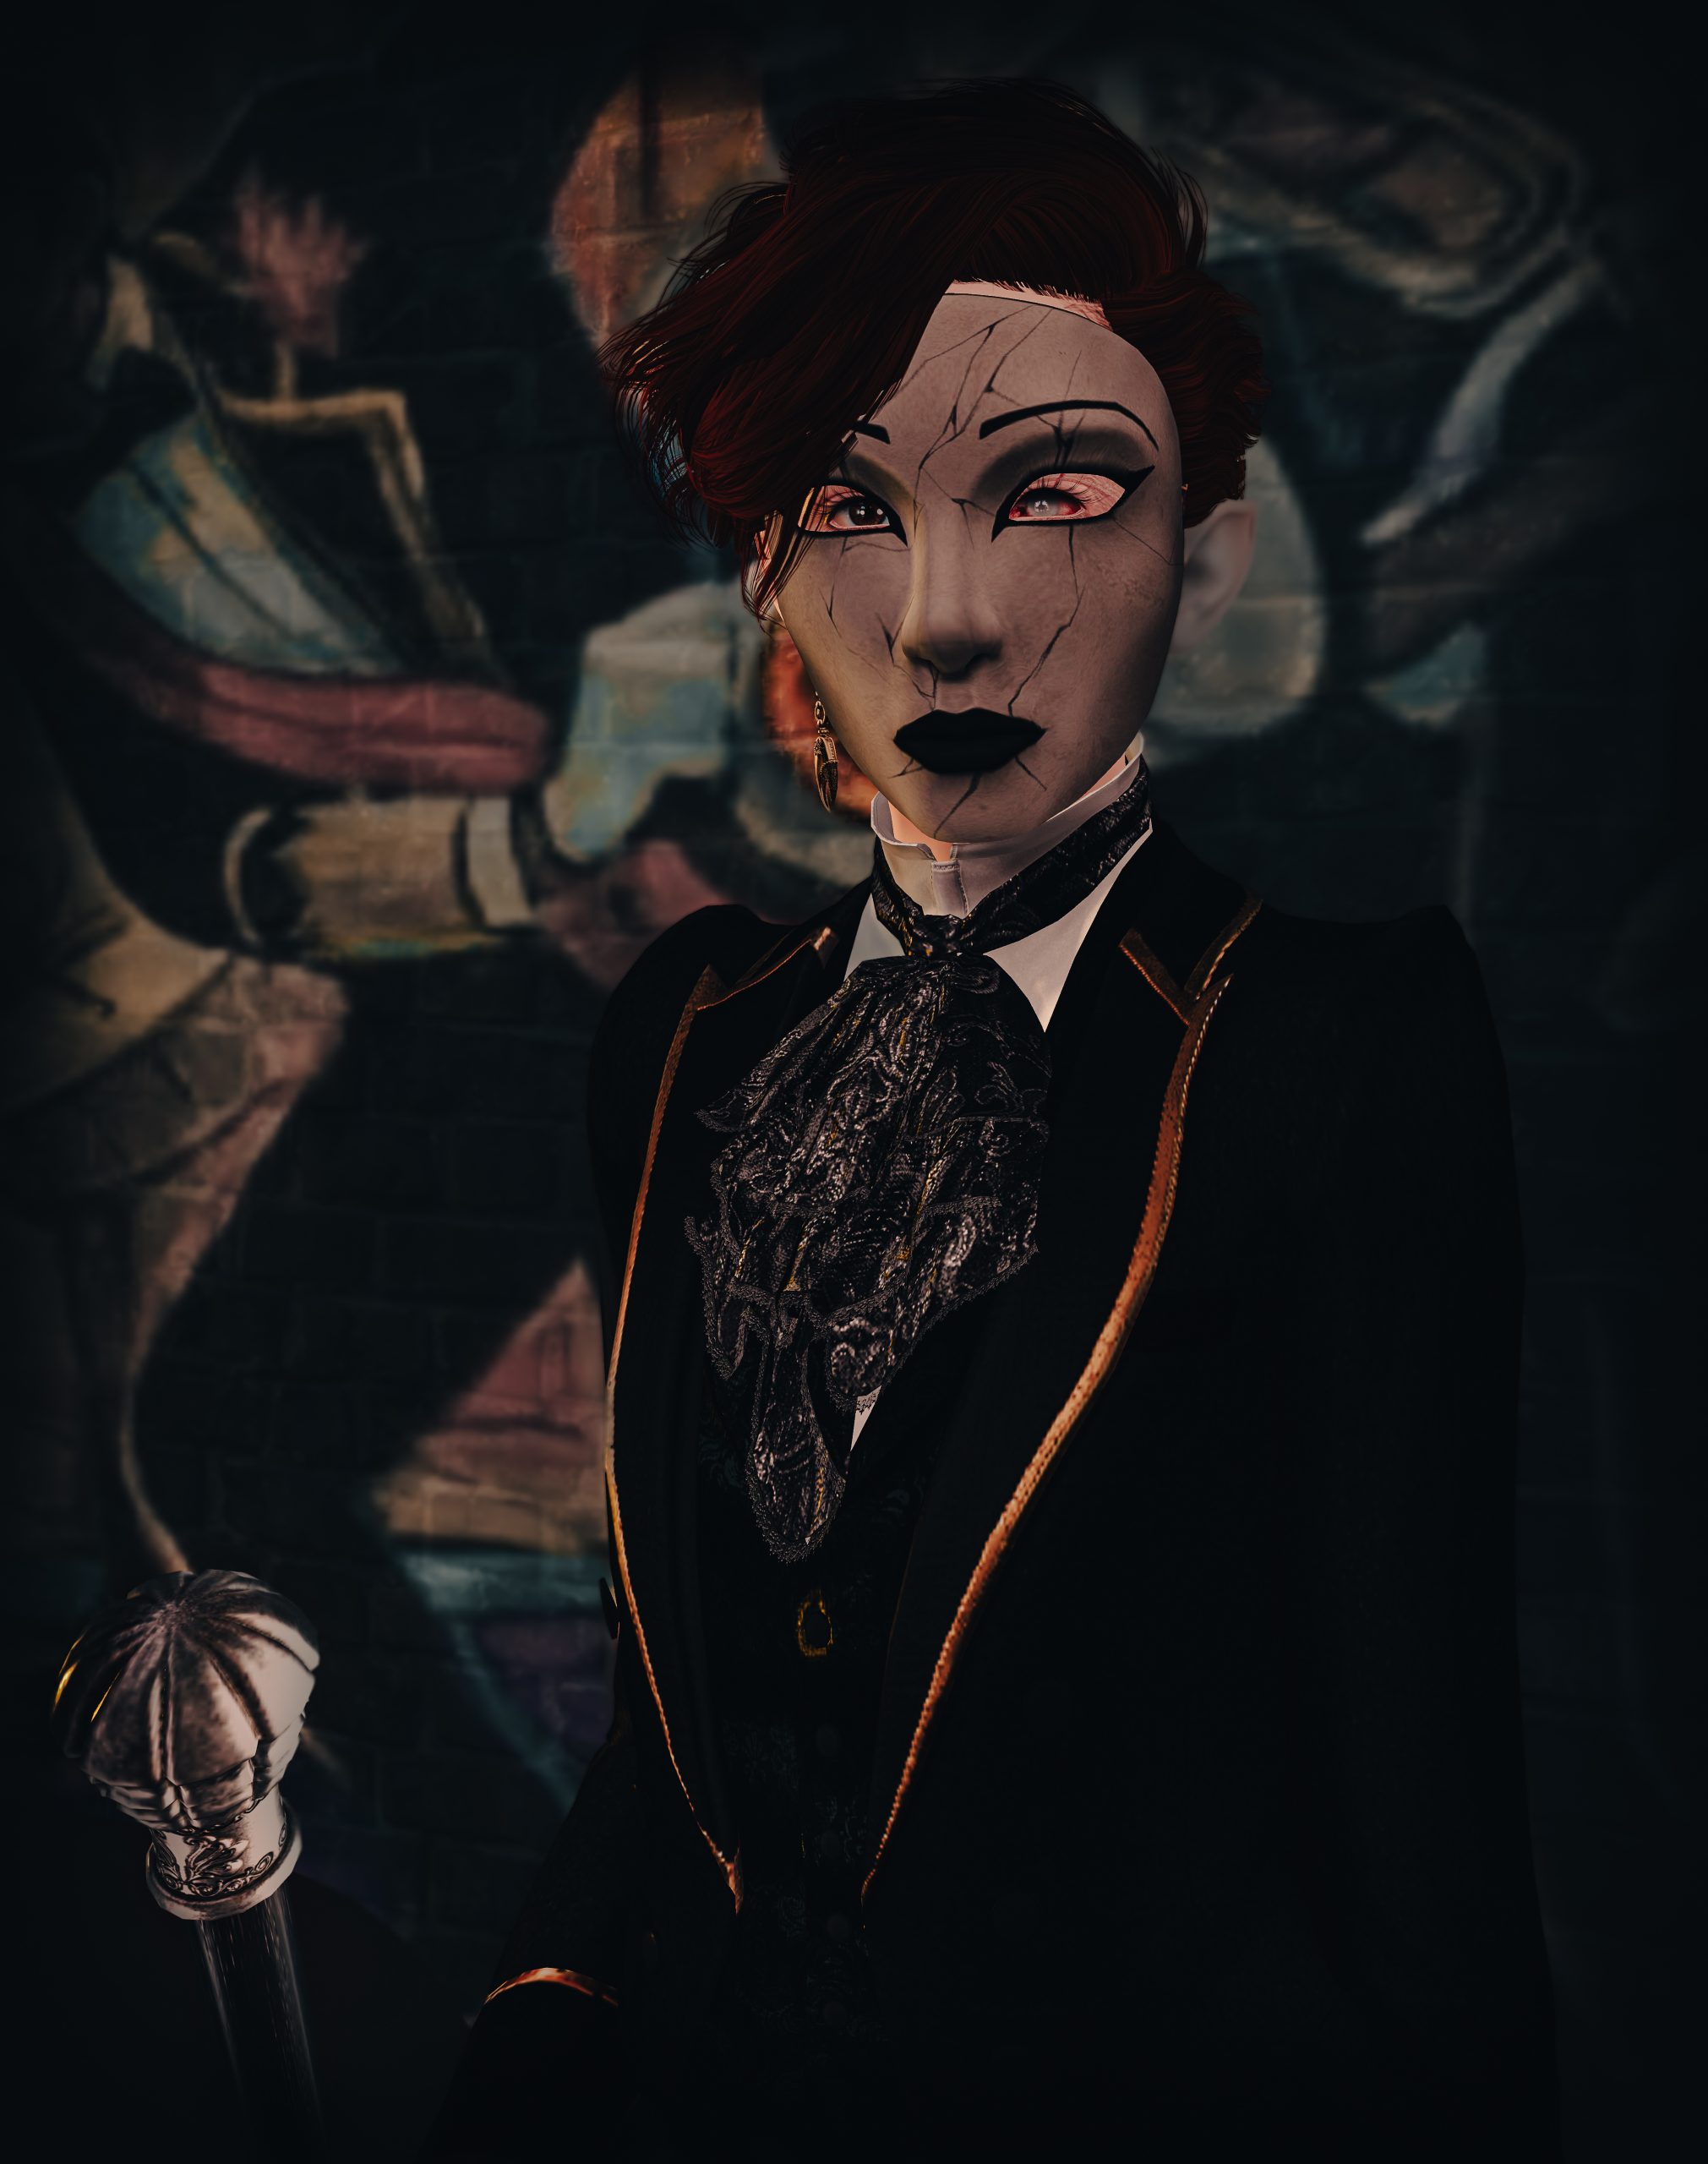 Z at the Hathian Ball